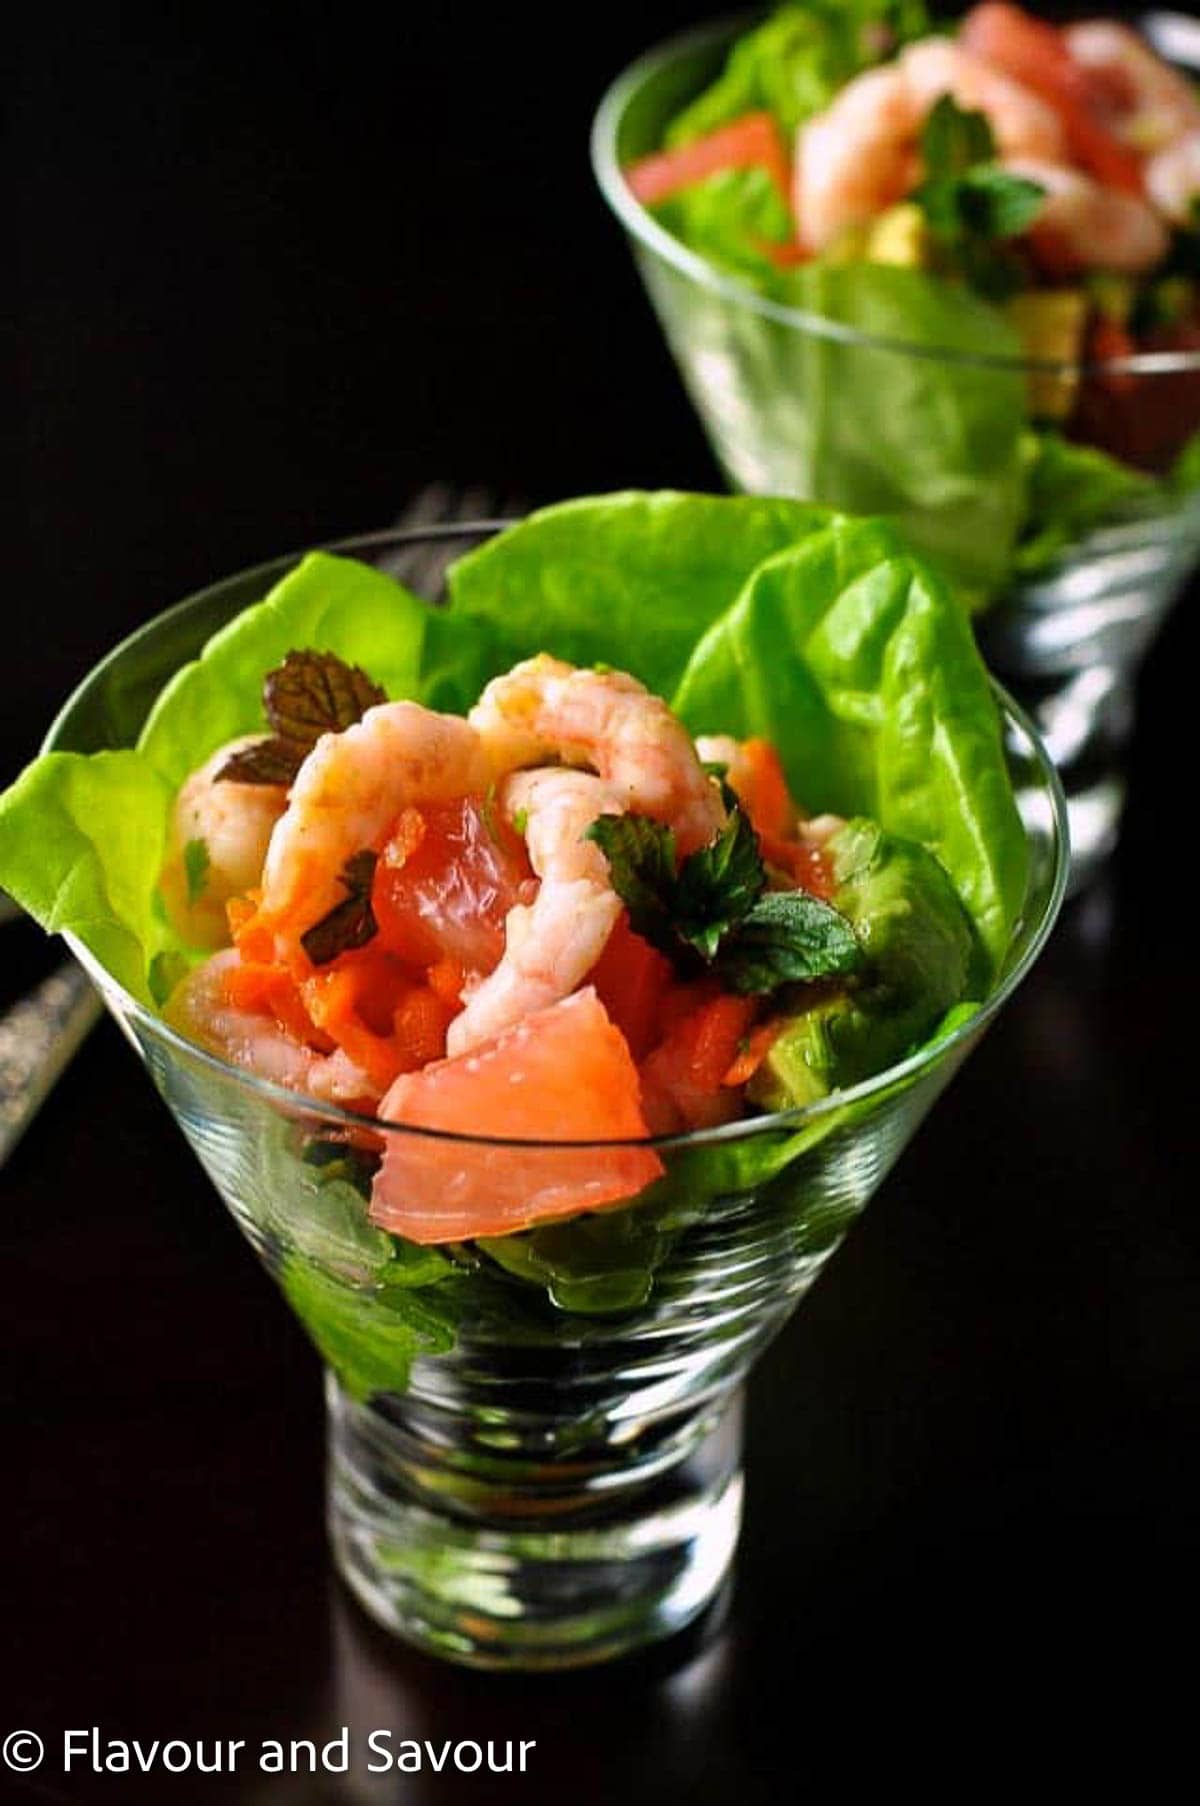 Thai-inspired shrimp salad with grapefruit, blood orange and mint leaves in a glass dish.